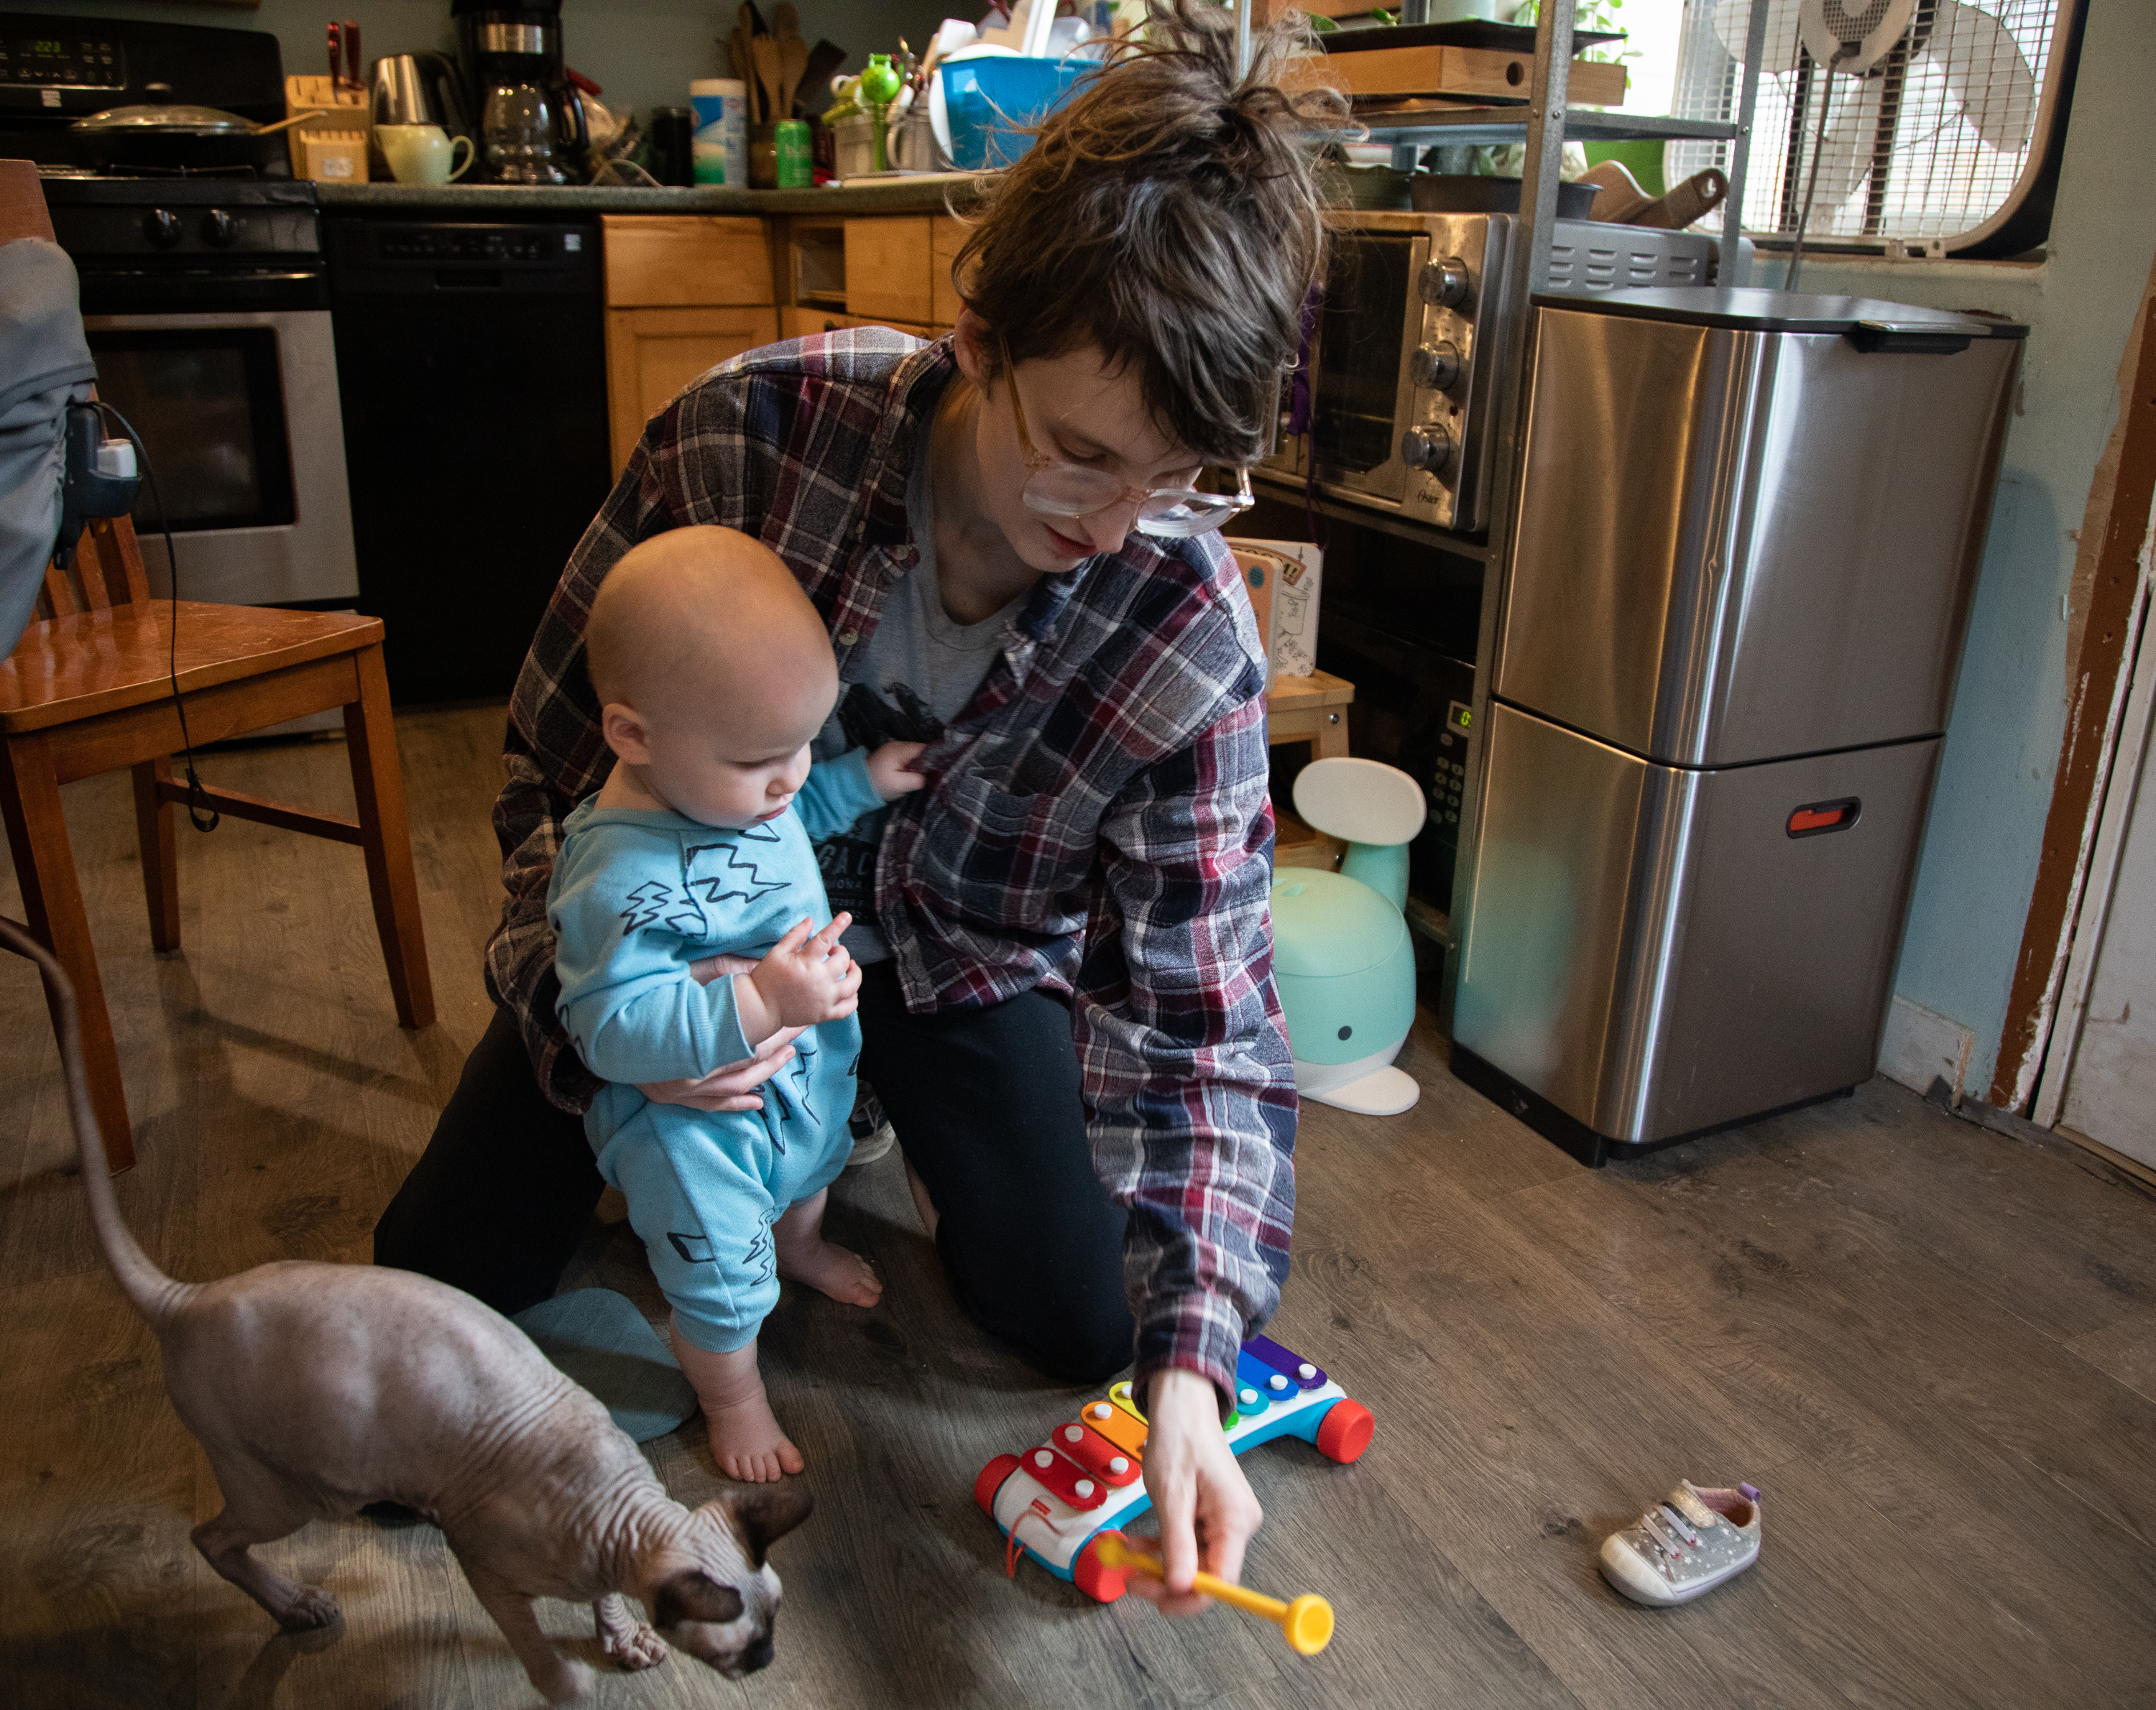 Laura Klotzer, 32, engages 10-month-old Ember with a toy Feb. 9 in their Bellingham home. Klotzer quit her job to take care of Ember.